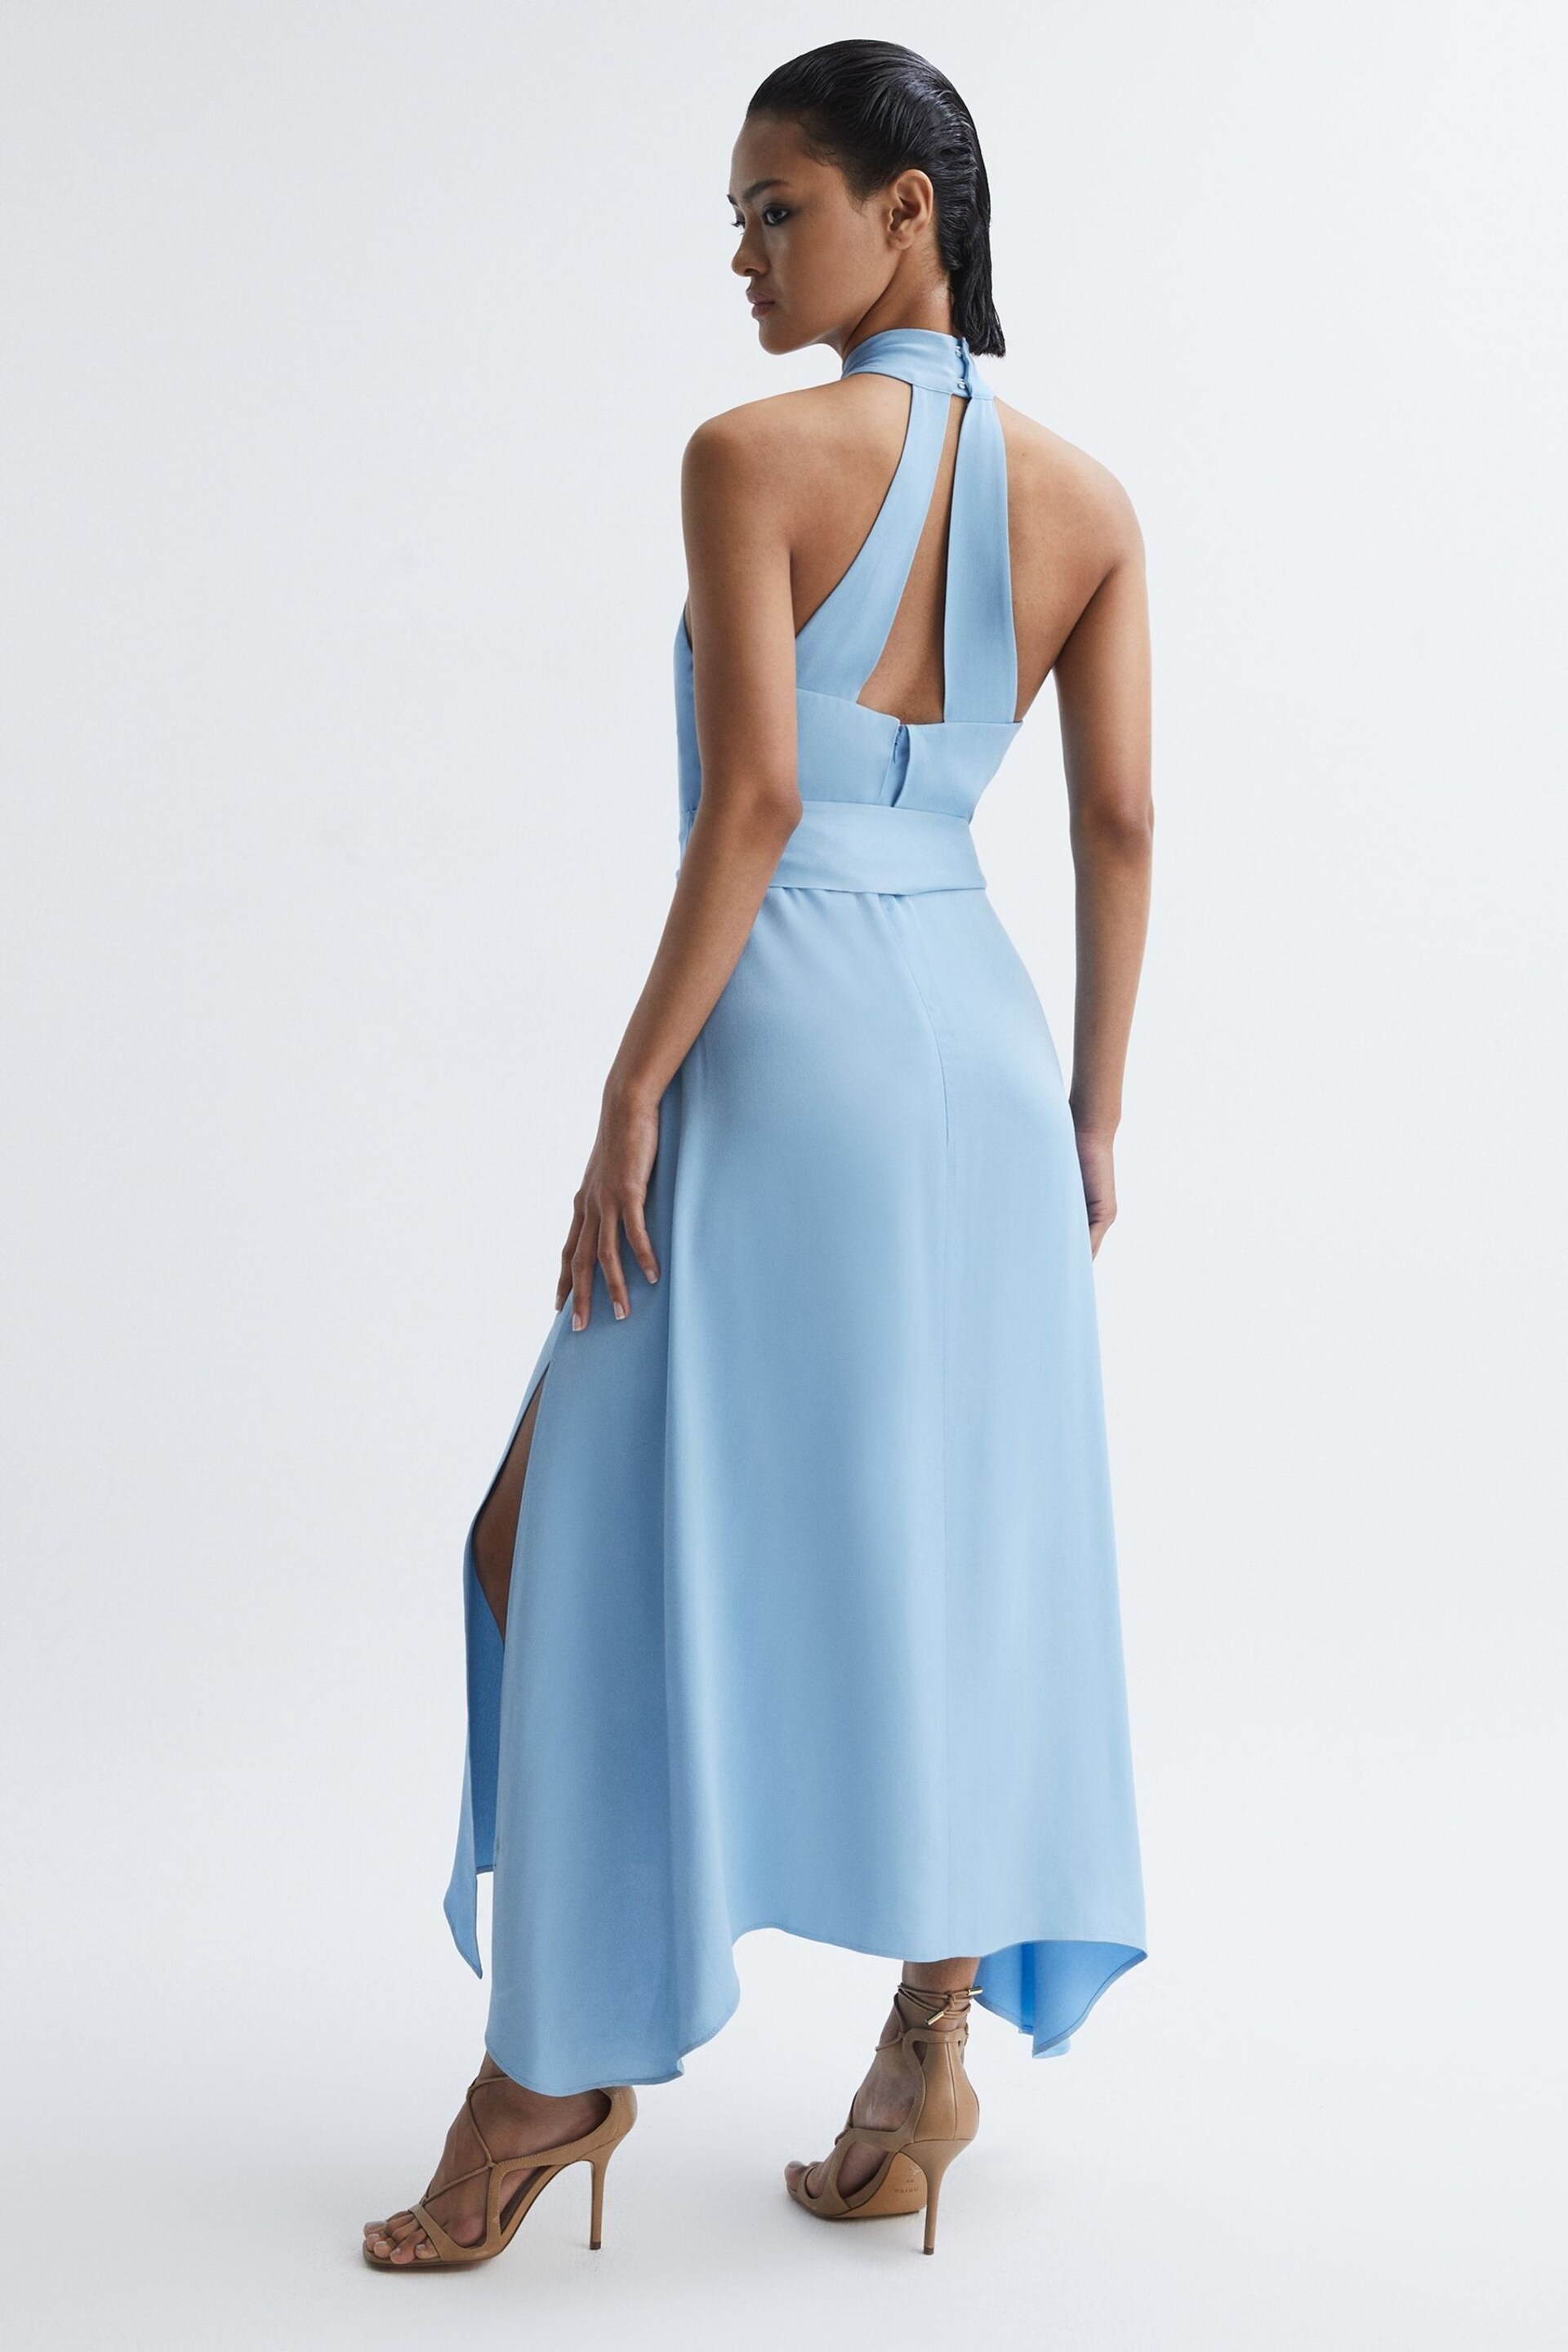 Reiss Blue Evelyn Fitted Halter Neck Midi Dress - Image 5 of 7